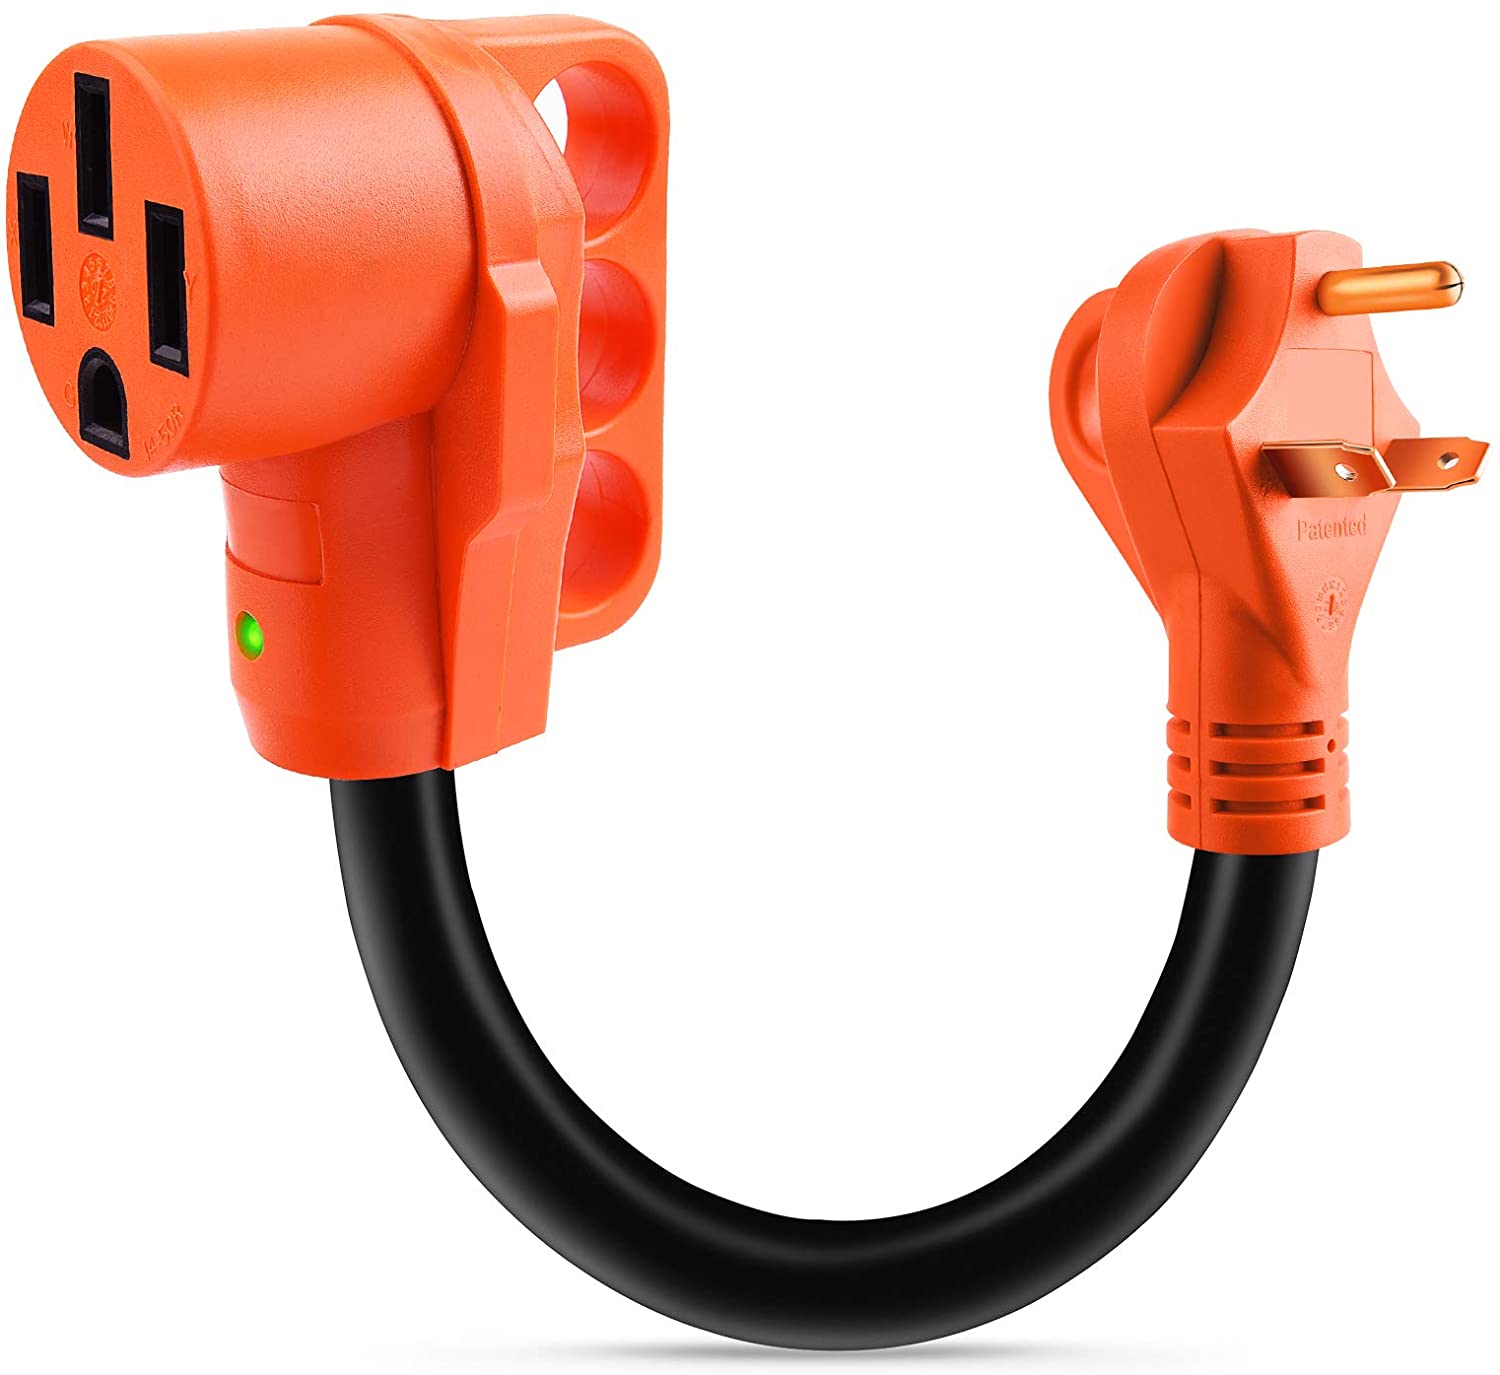 30A Male to 50A Female RV Power Cord Plug Adapter Heavy Duty Electrical Power Adapter with LED Indicator